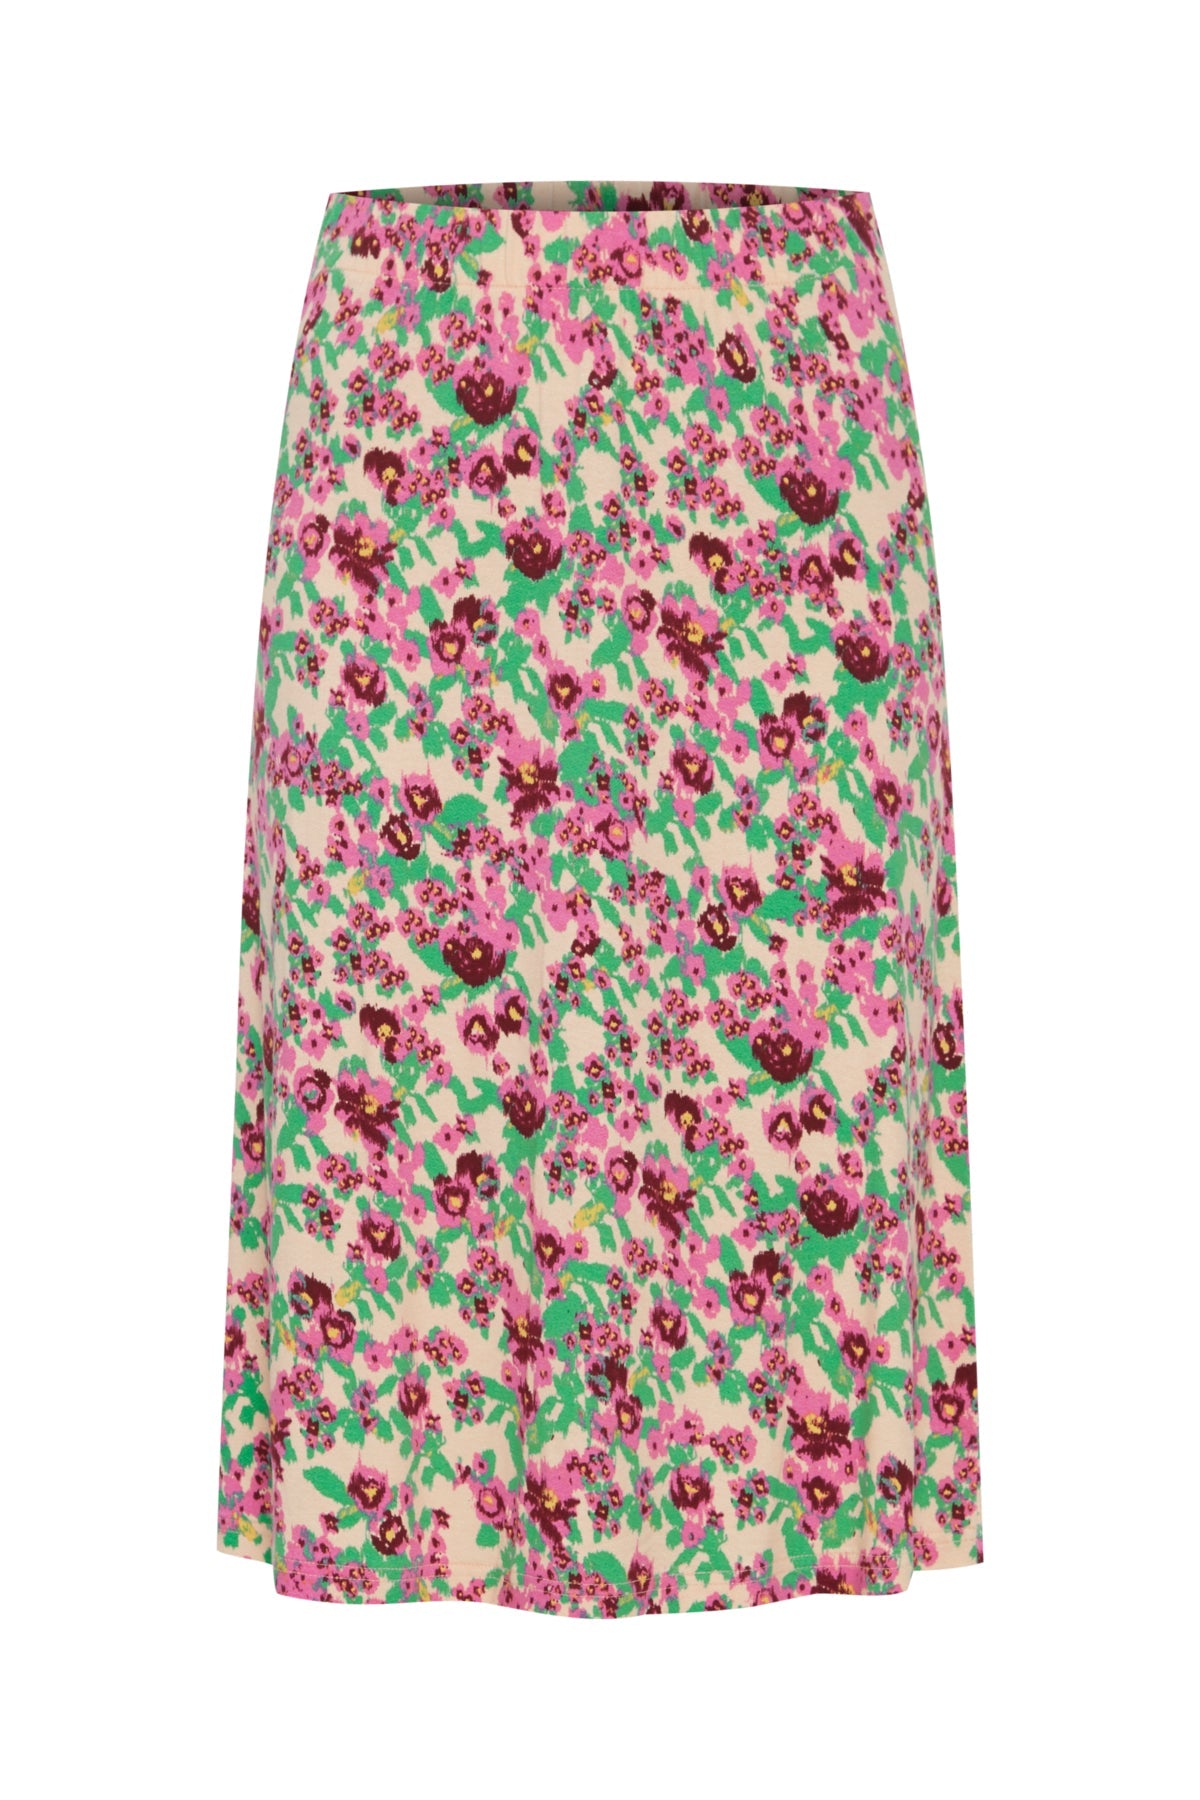 *Ihportia Skirt Pink Floral